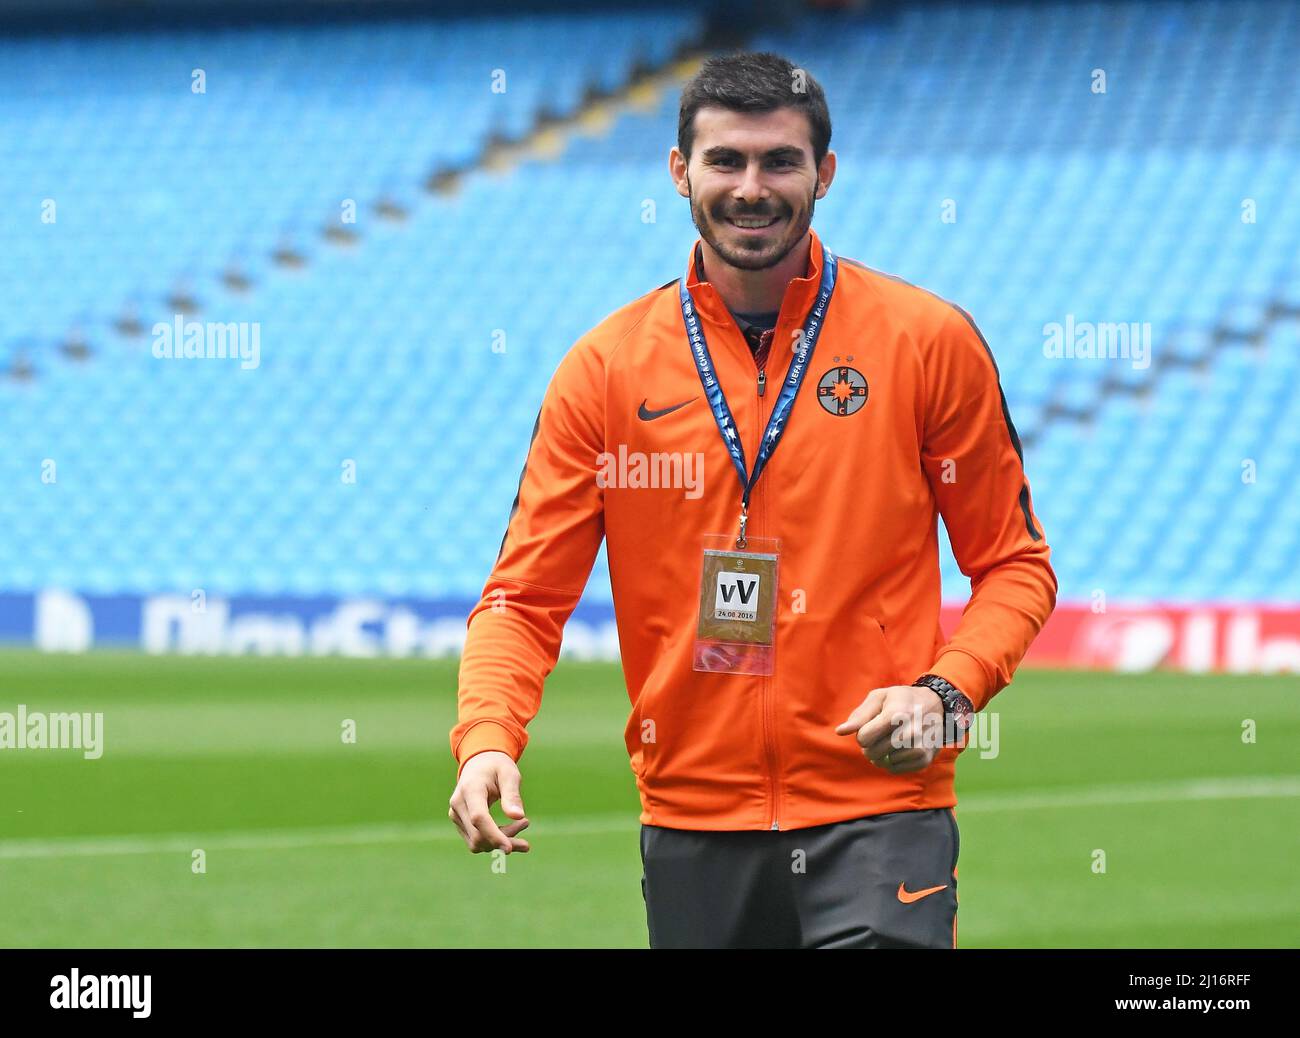 MANCHESTER, ENGLAND - AUGUST 24, 2016: Florin Nita of FCSB pictured prior to the second leg of the 2016/17 UEFA Champions League tie between Manchester City (Engalnd) and FCSB (Romania) at Etihad Stadium. Copyright: Cosmin Iftode/Picstaff Stock Photo